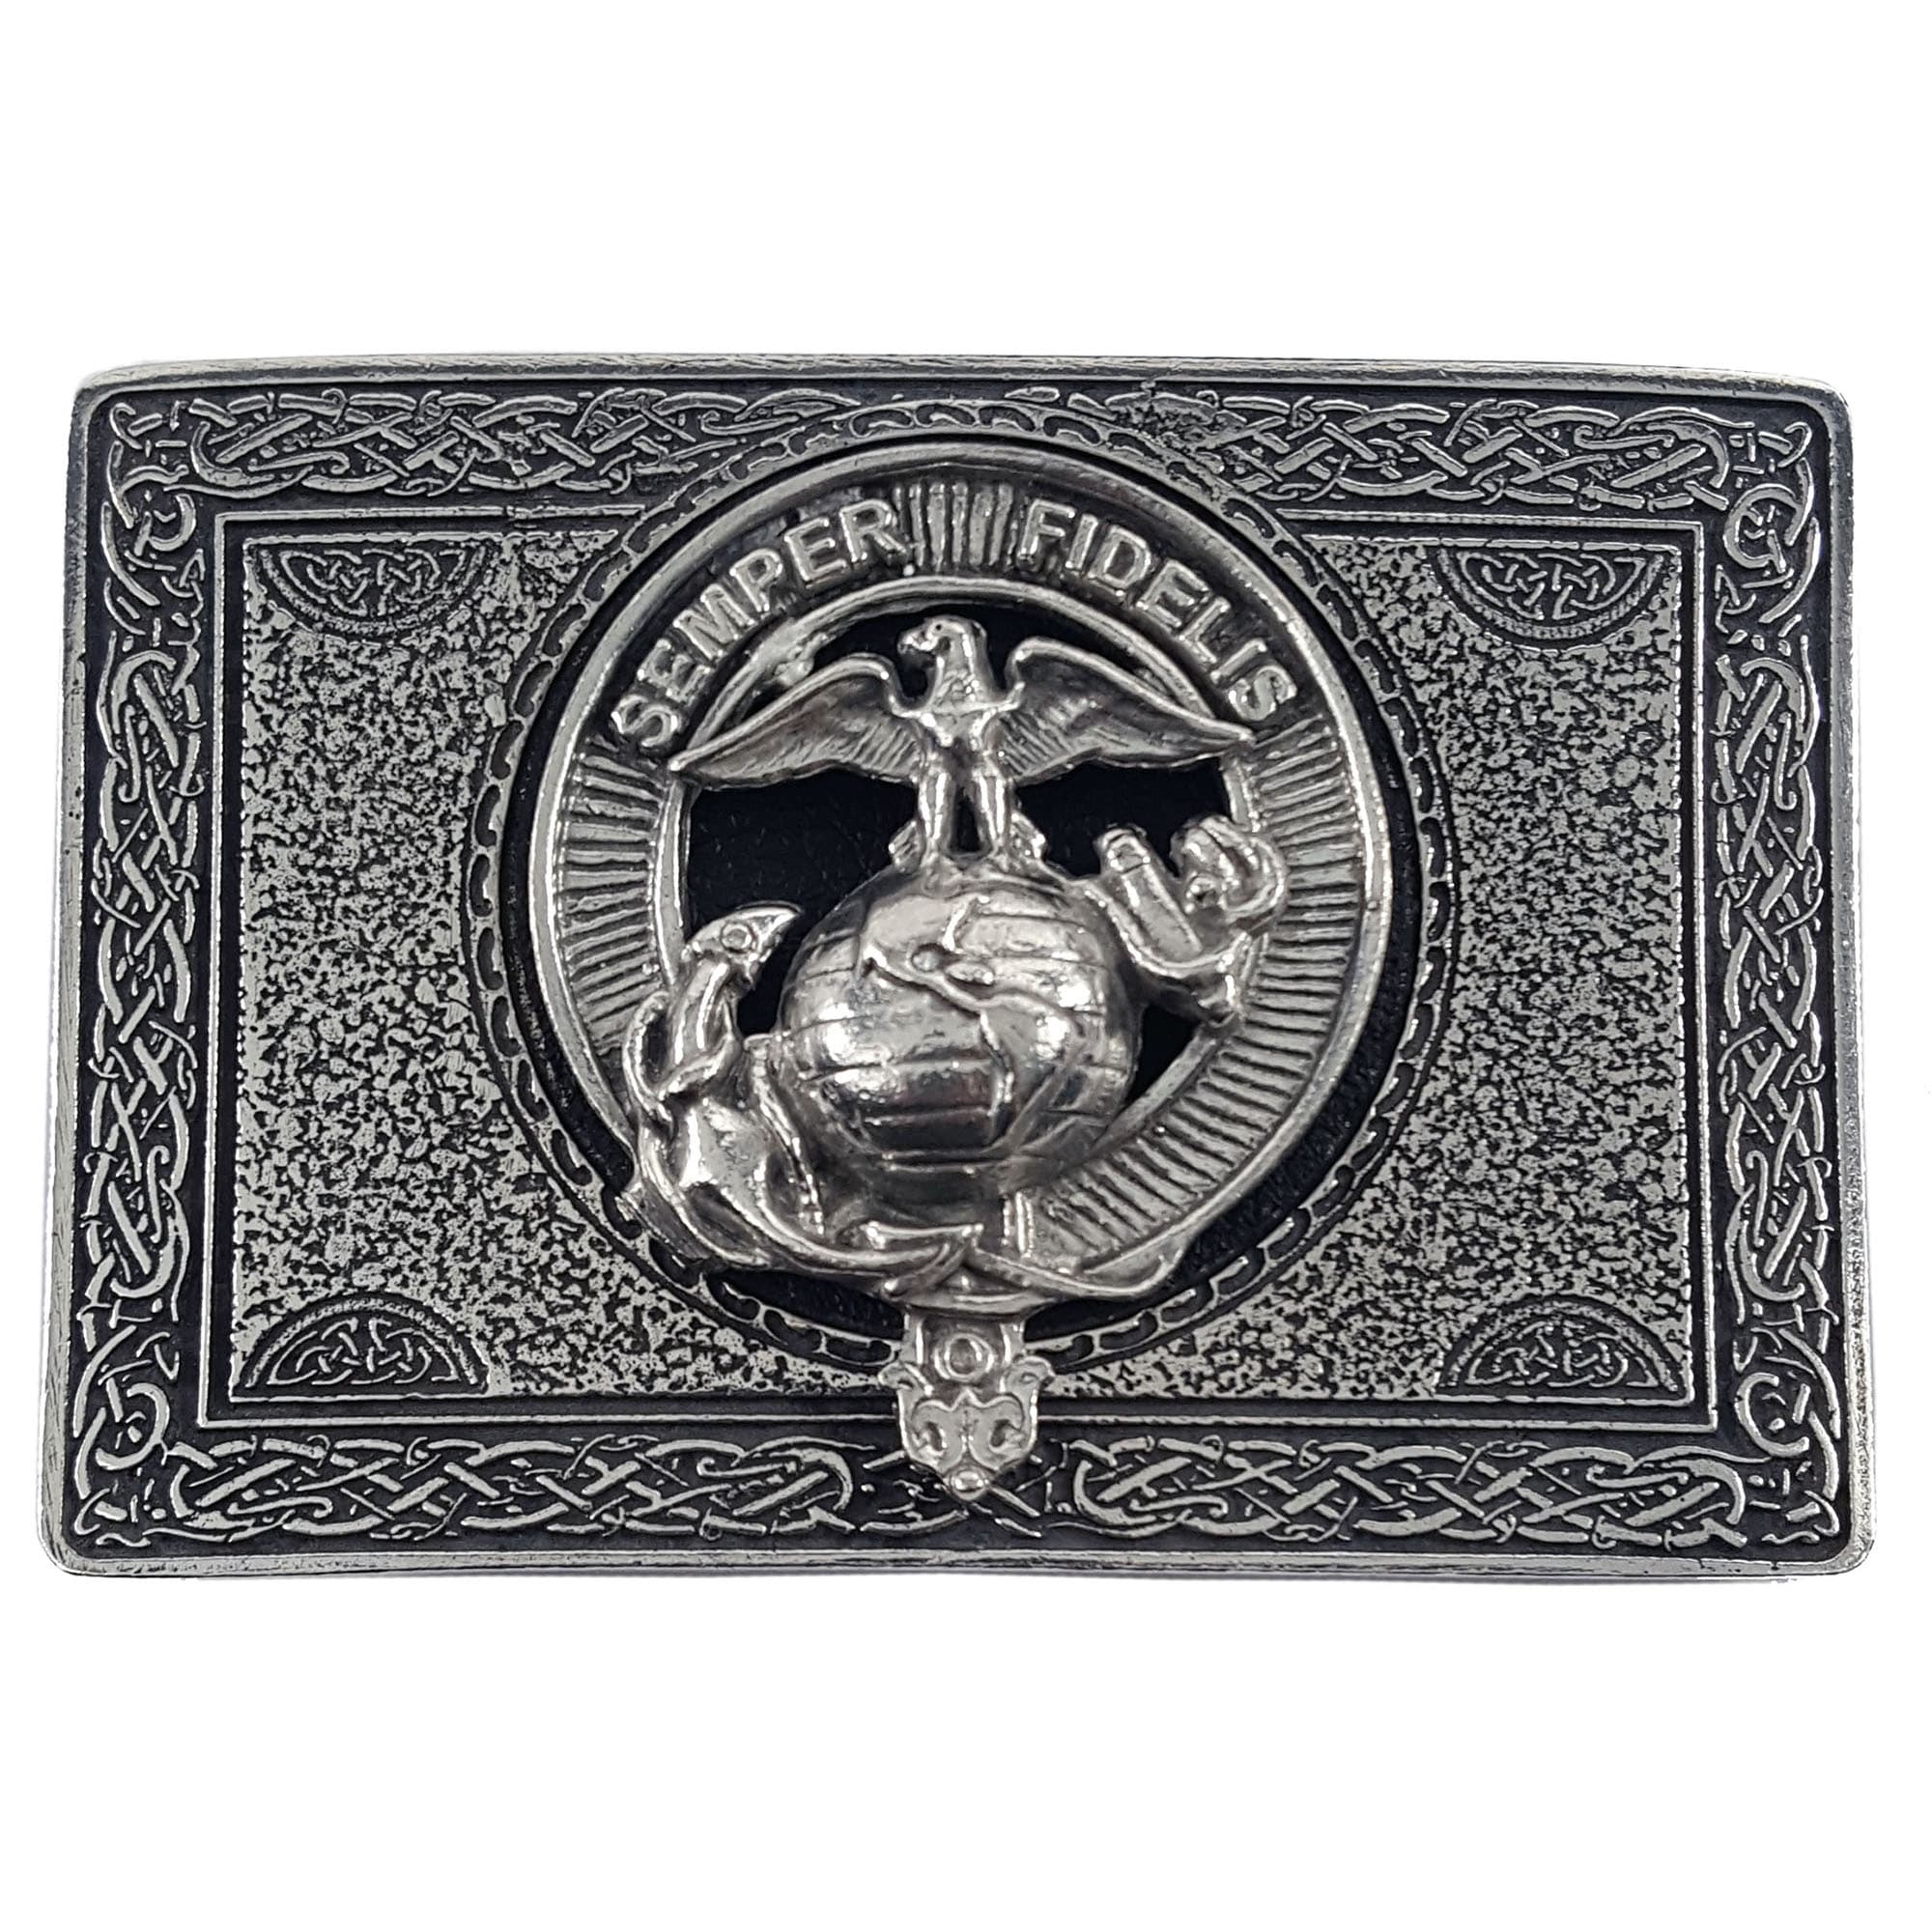 A U.S. Marine Corps USMC Pewter Kilt Belt Buckle - Officially Licensed with an eagle on it, made of pewter.